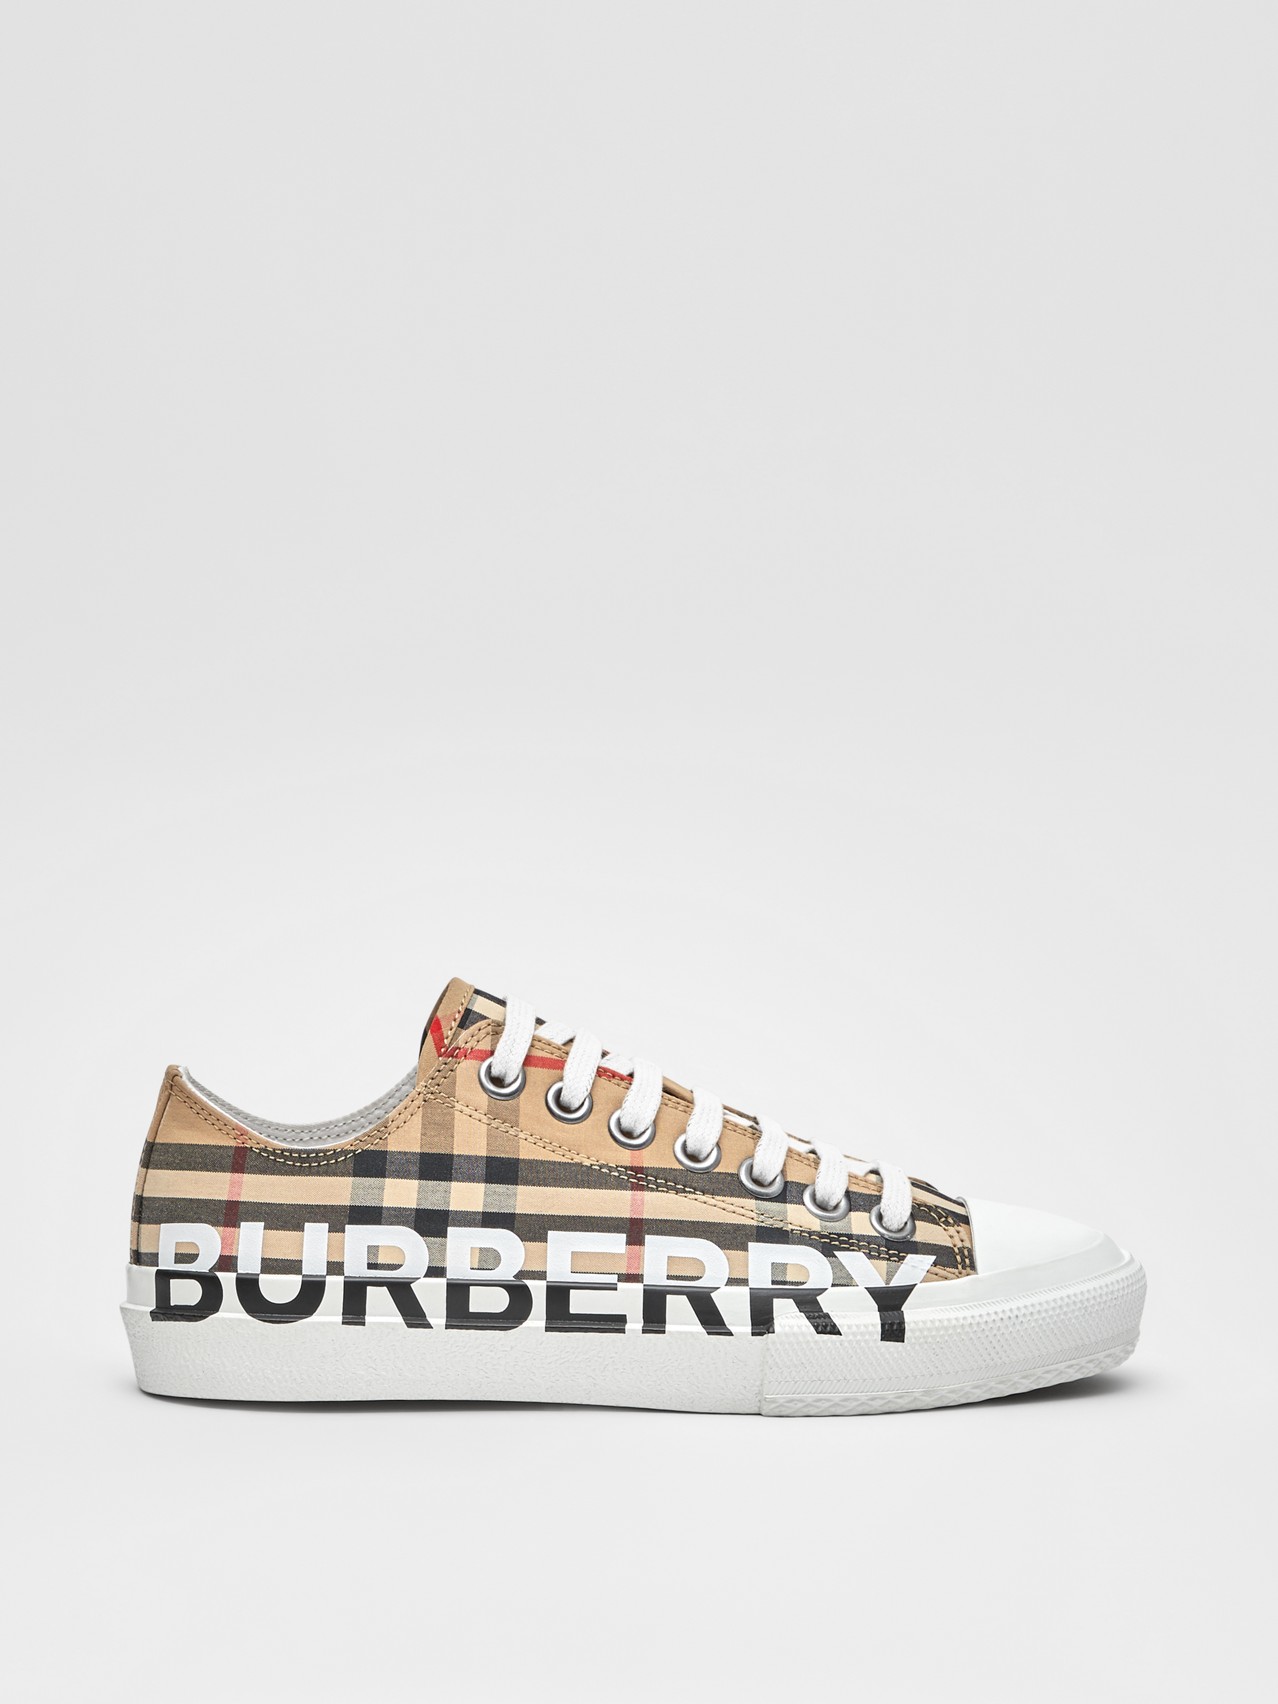 Logo Print Vintage Check Cotton Sneakers by Burberry, available on burberry.com for $370 Bella Hadid Shoes SIMILAR PRODUCT